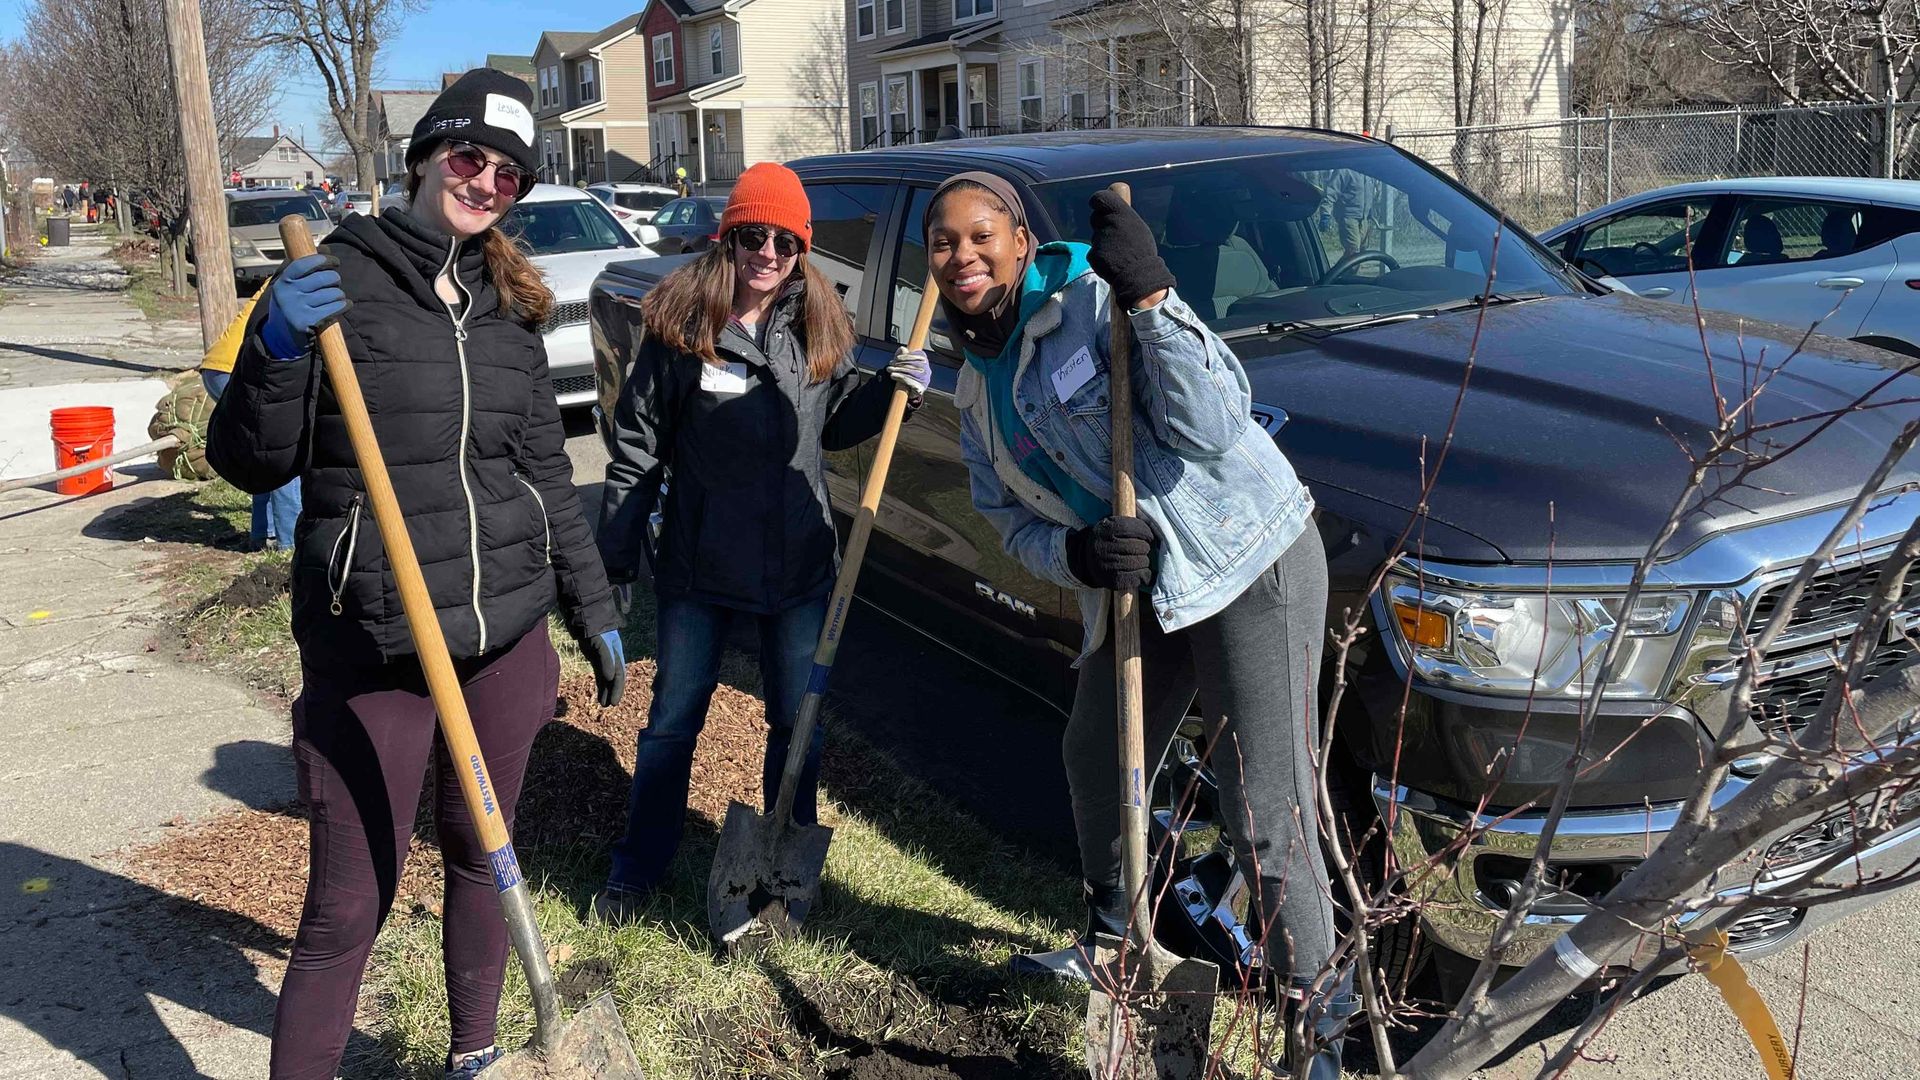 Volunteers planting trees for the Greening of Detroit nonprofit holding shovels 